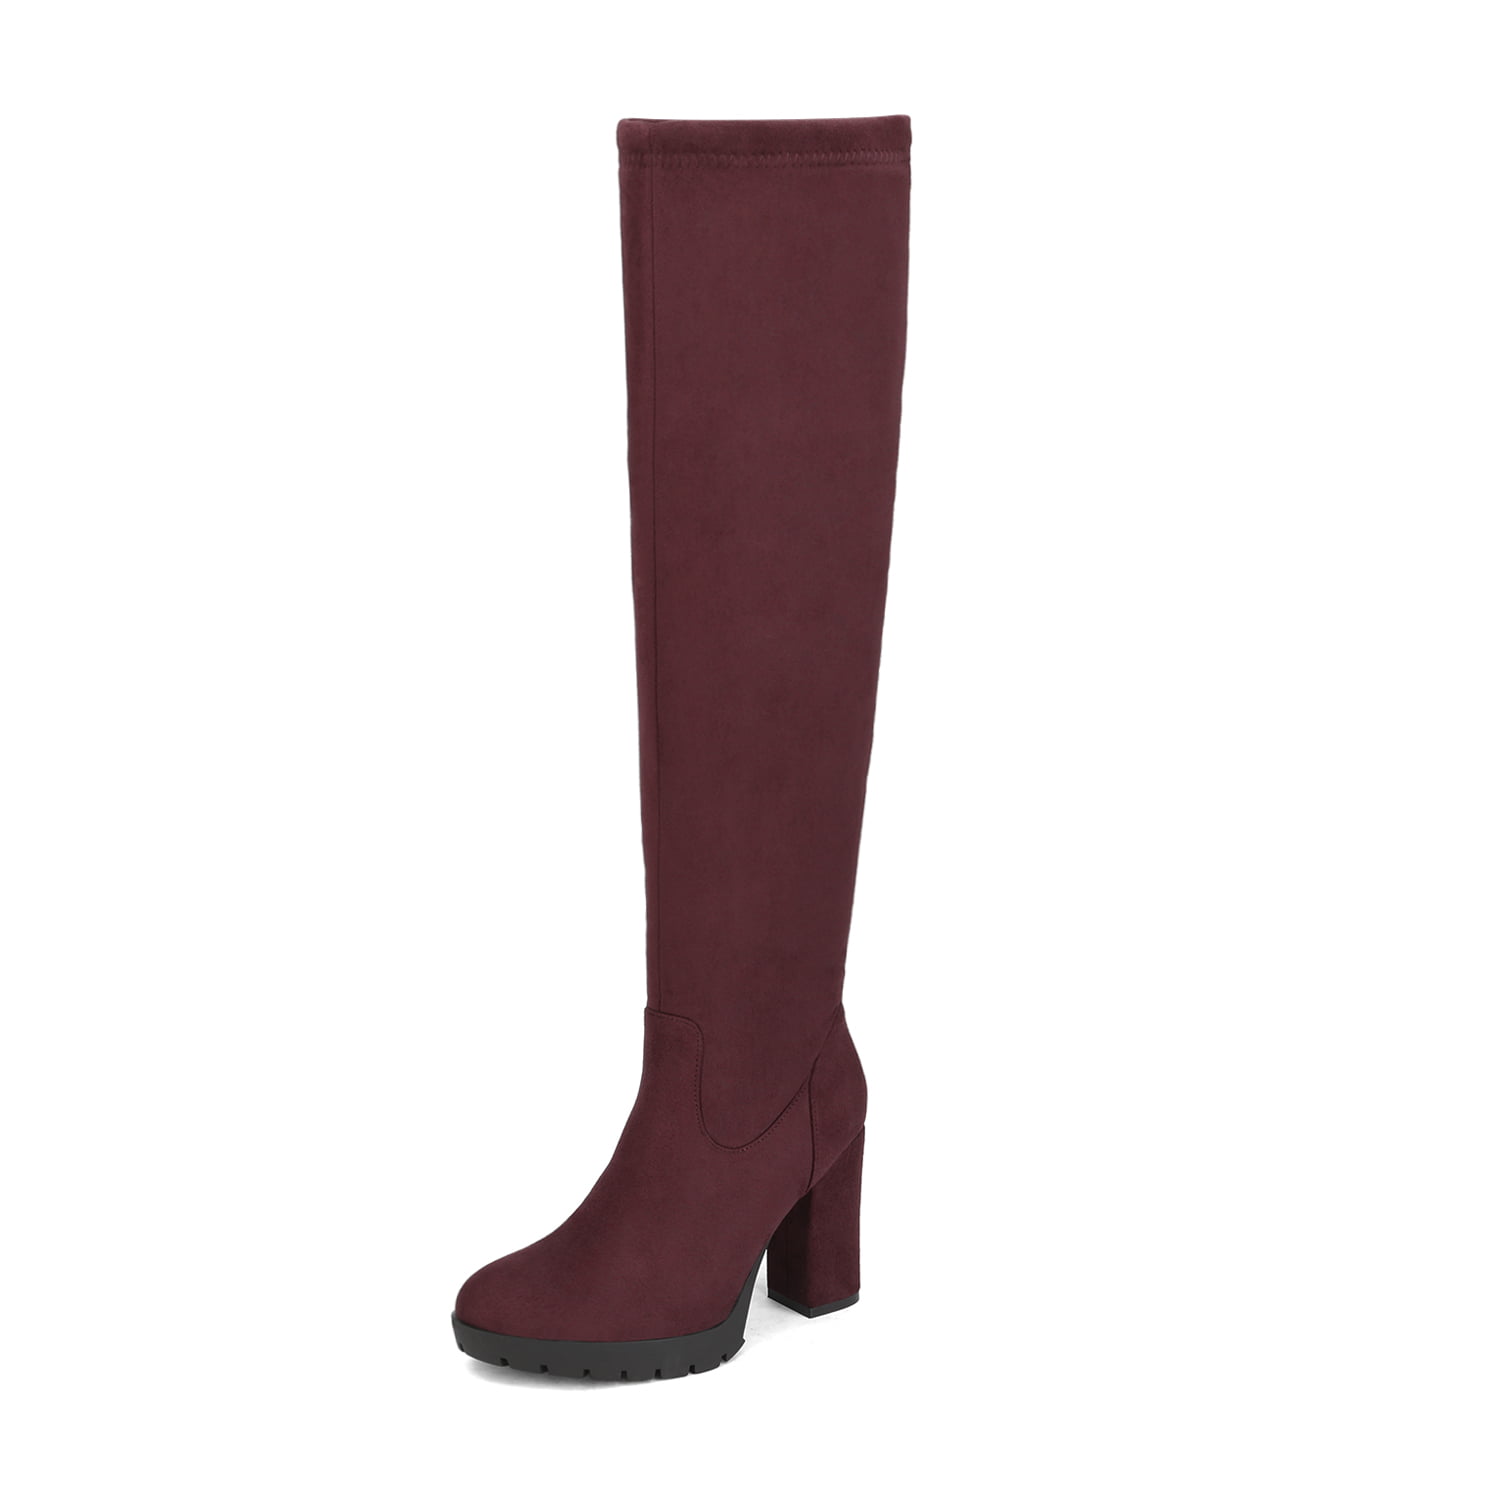 thigh high boots size 5.5